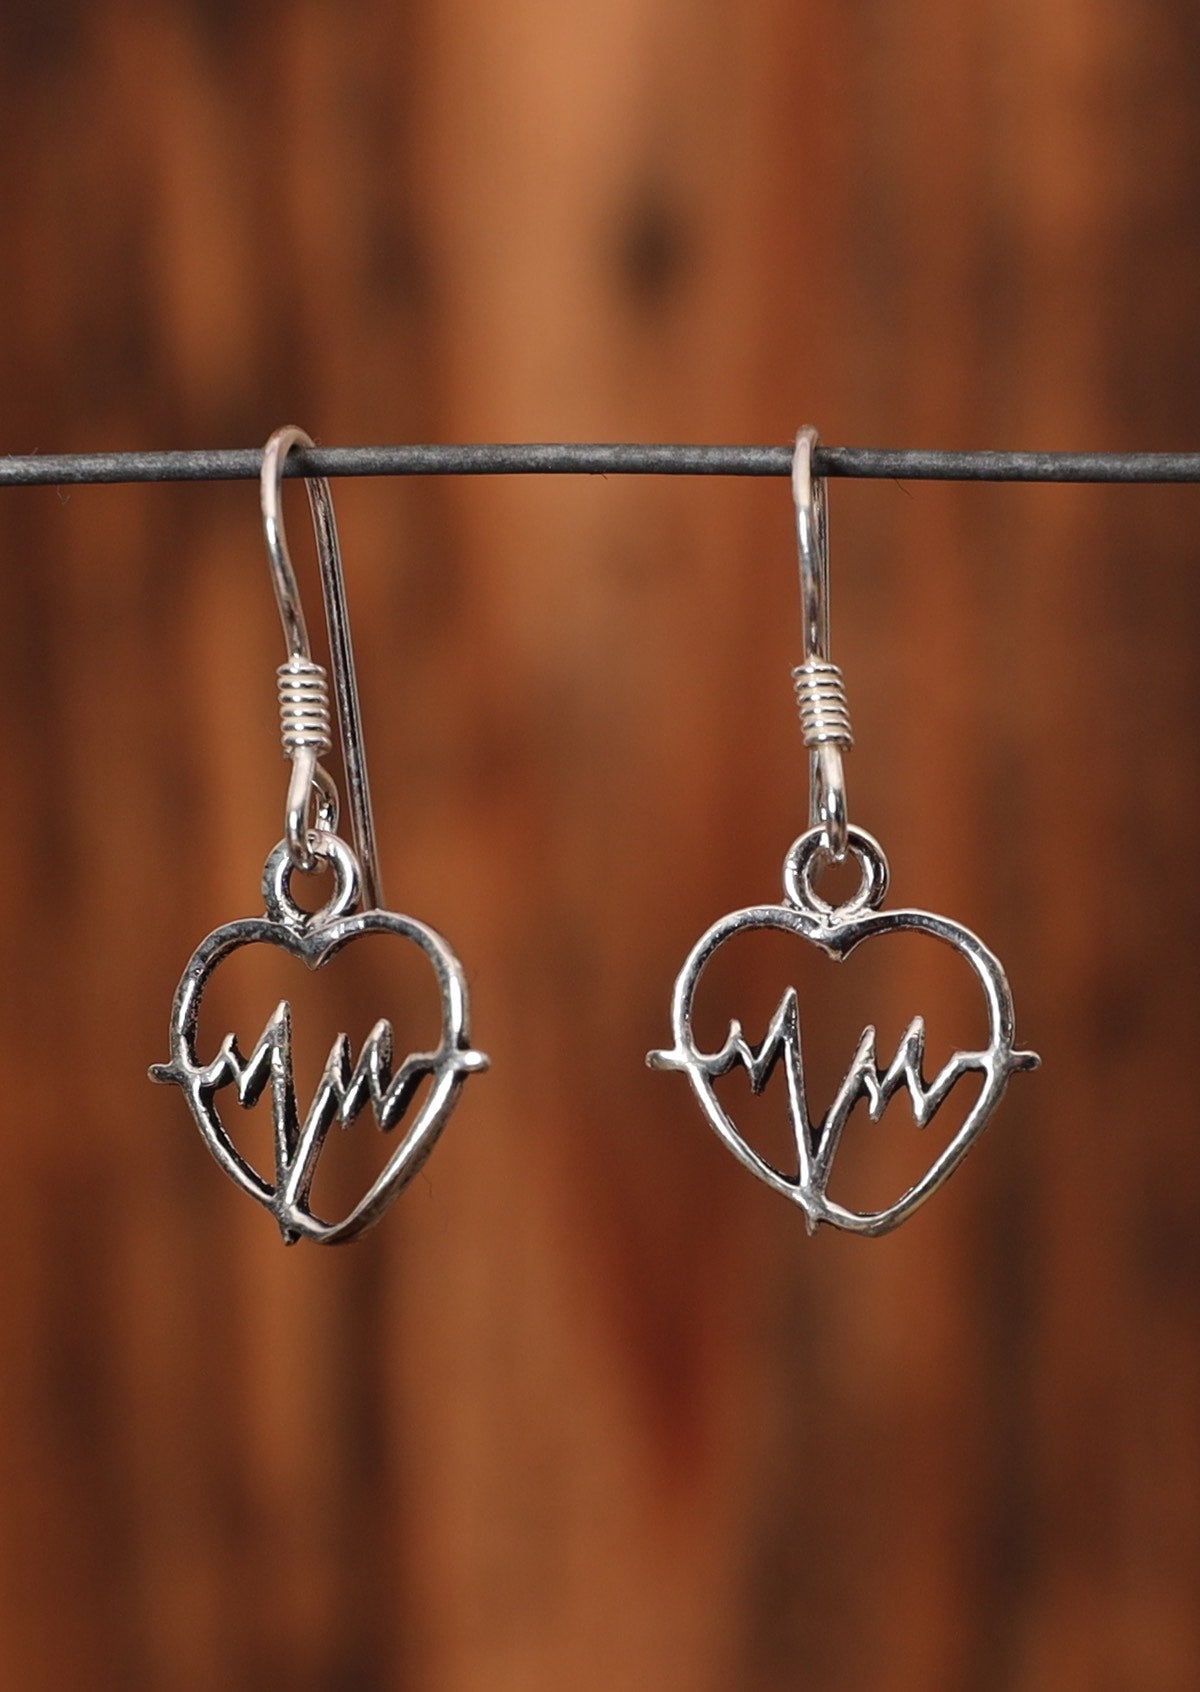 92.5% silver heartbeat earrings on a wire for display.